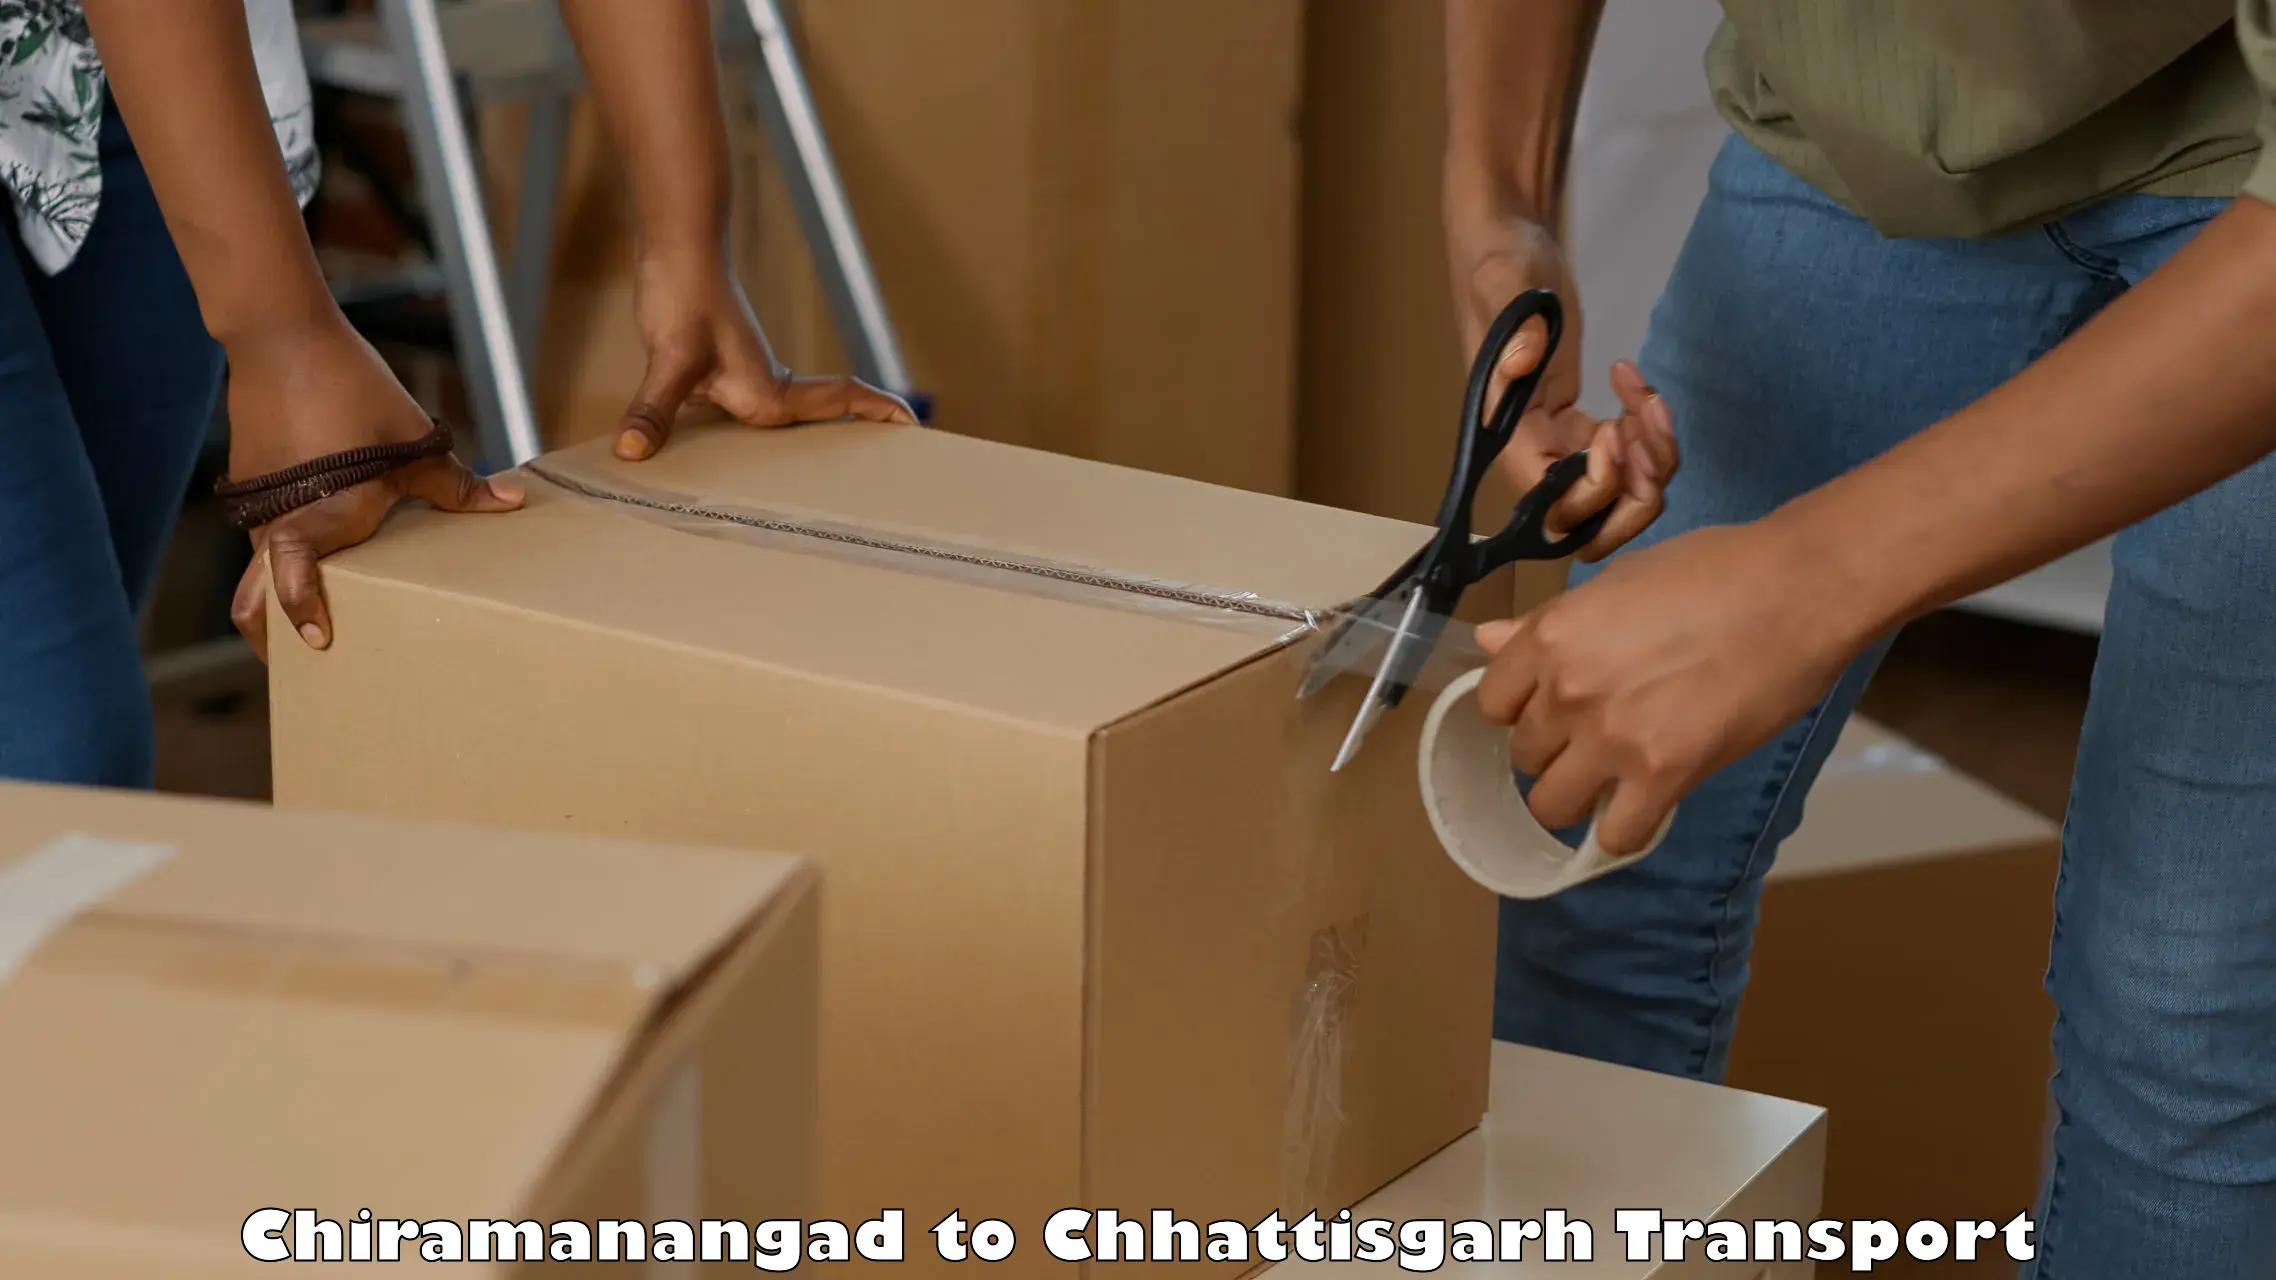 Commercial transport service Chiramanangad to Dongargarh